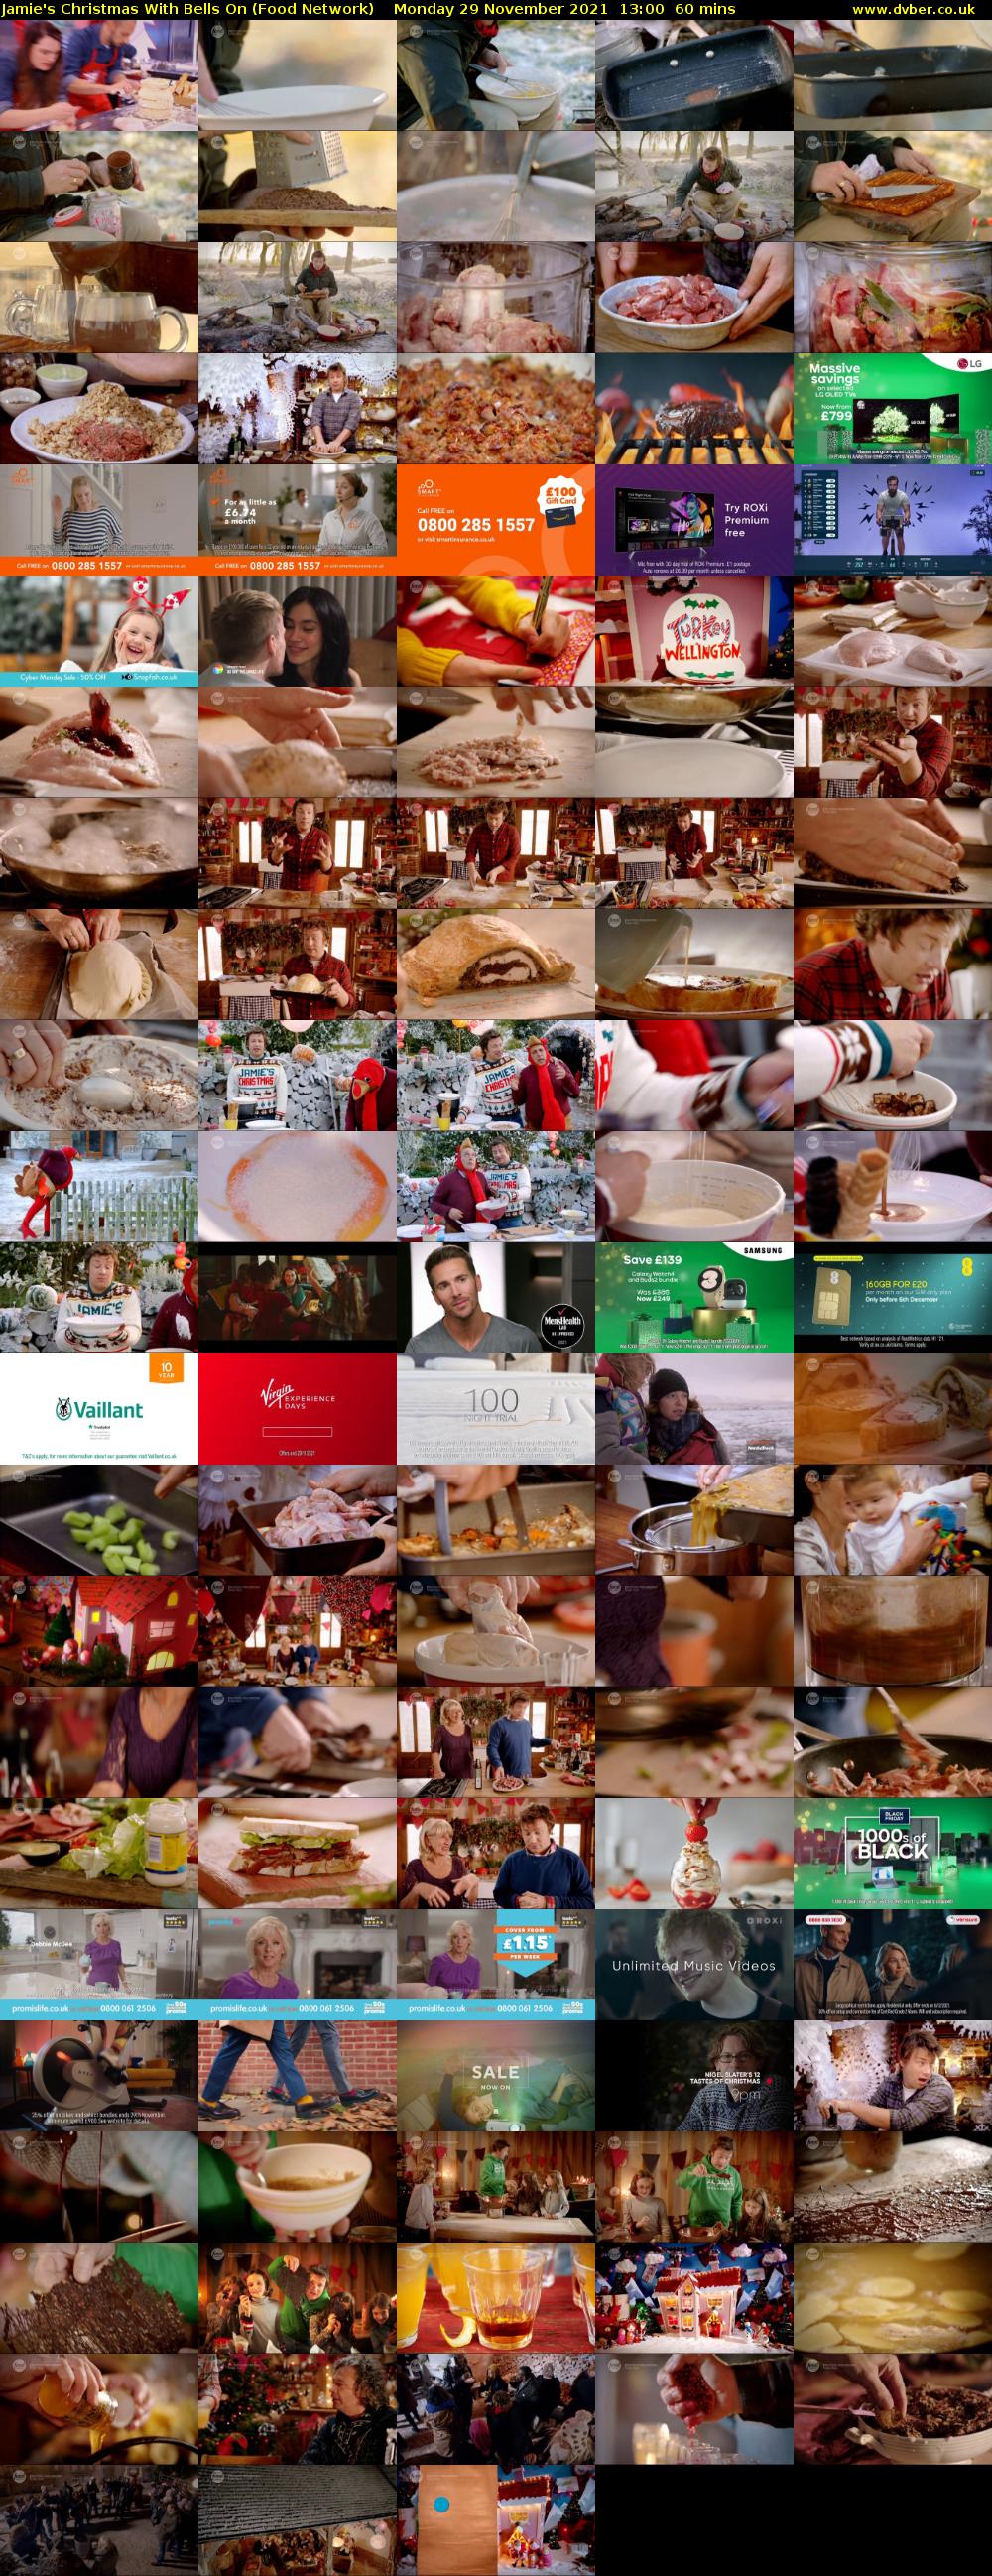 Jamie's Christmas With Bells On (Food Network) Monday 29 November 2021 13:00 - 14:00